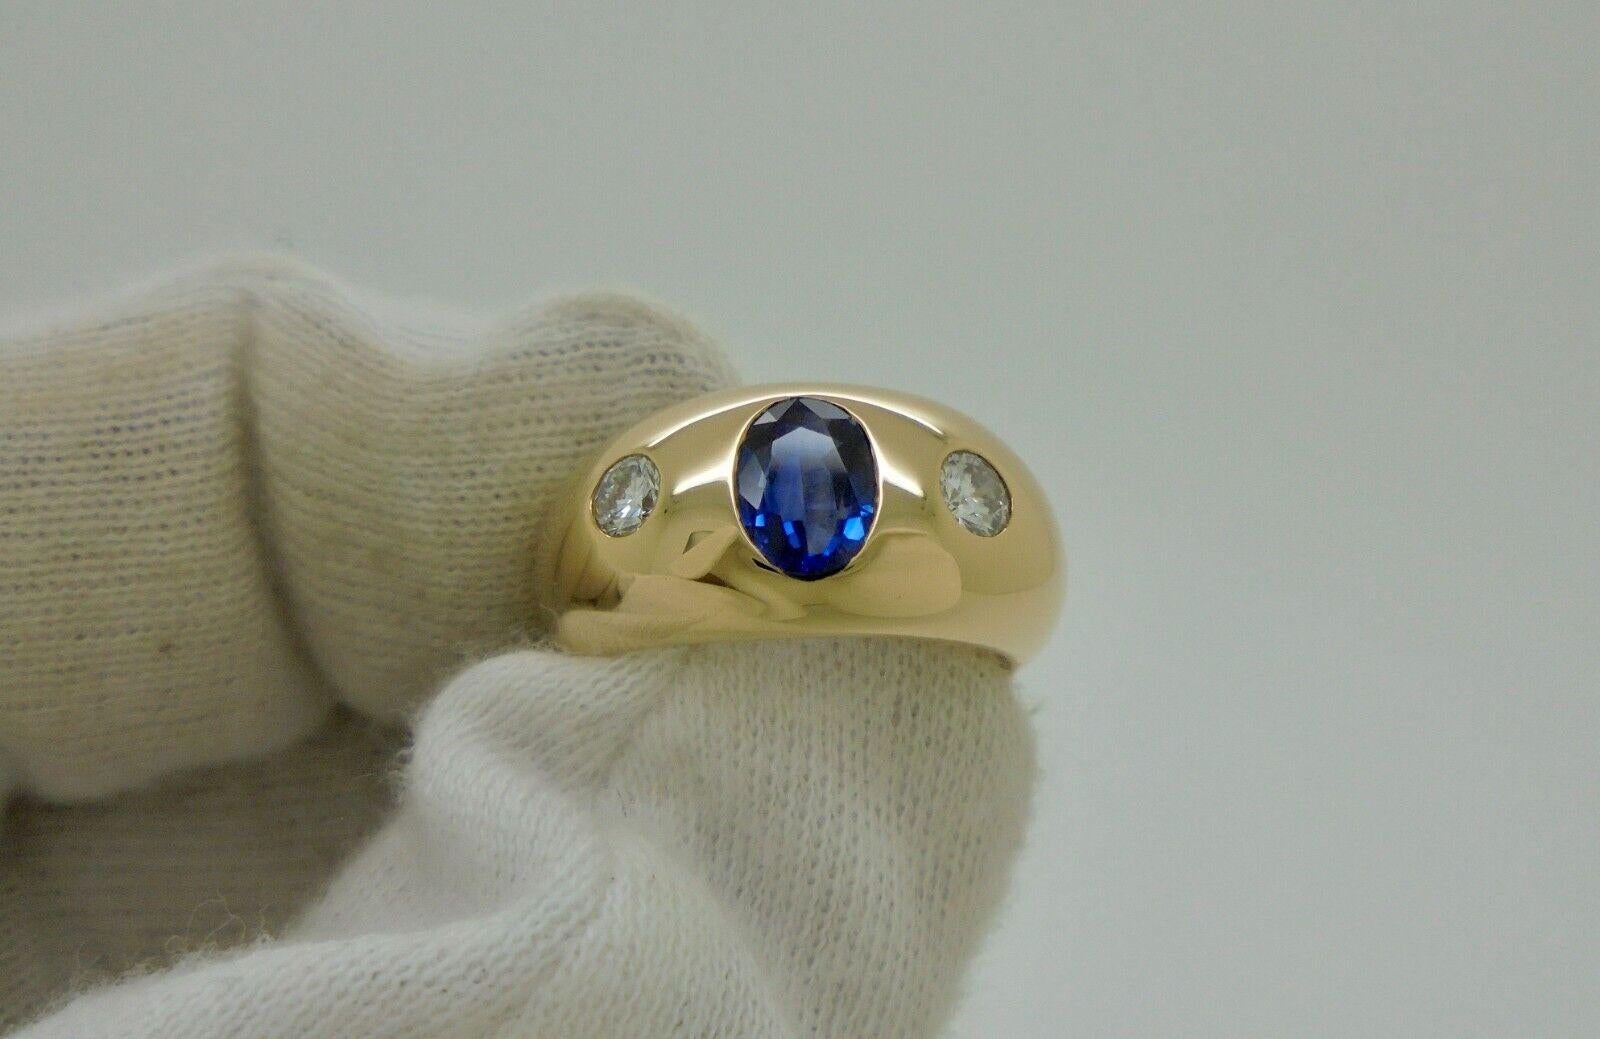 BVLGARI ITALY 18k Yellow Gold, Sapphire & Diamond Three Stone Ring Vintage w/Box In Excellent Condition For Sale In Beverly Hills, CA